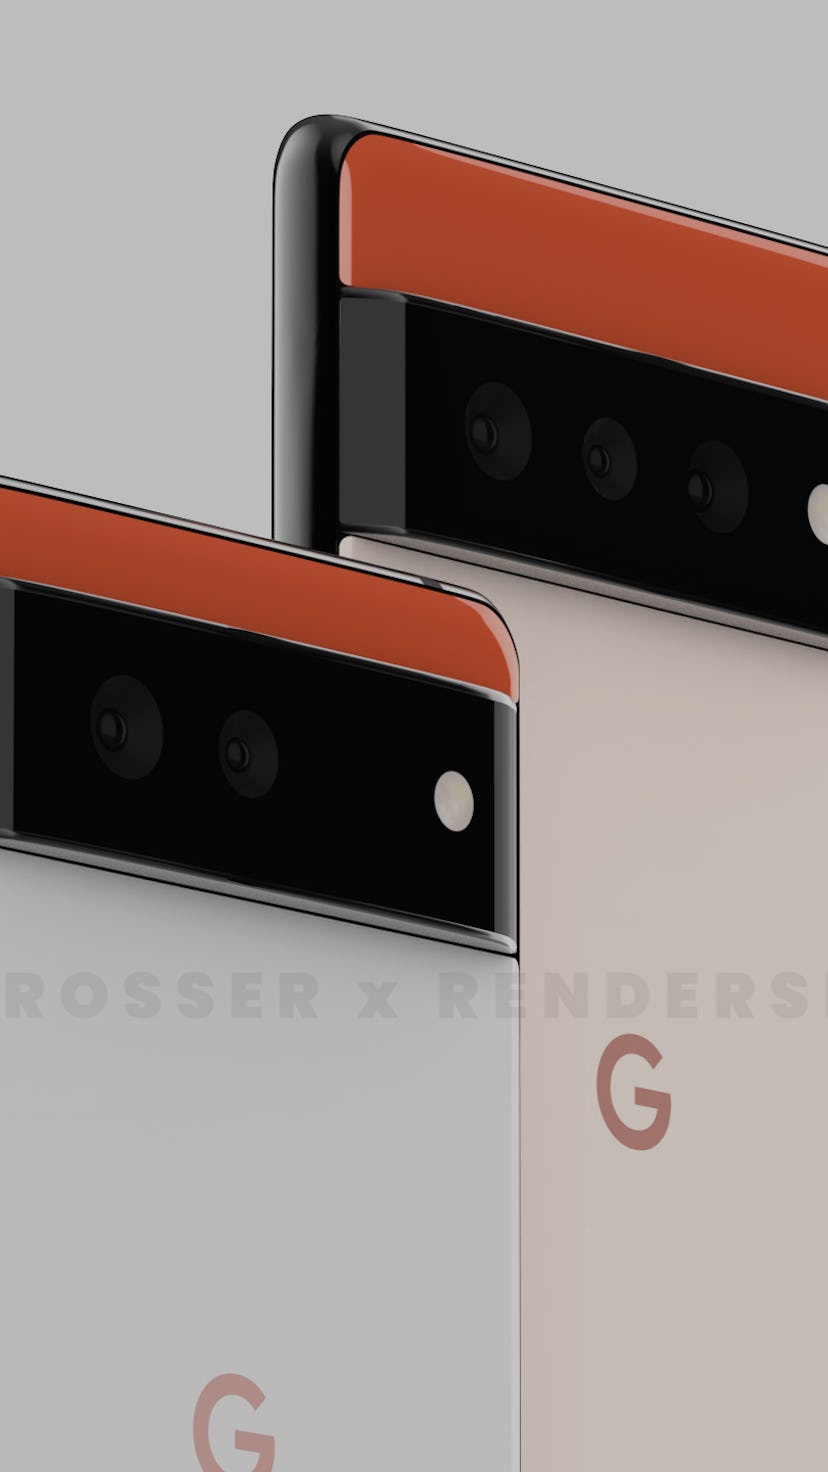 Renders made from leaks of Google's upcoming Pixel 6 phone. Mobile. Android. Smartphones. Pixel 6 Pr...